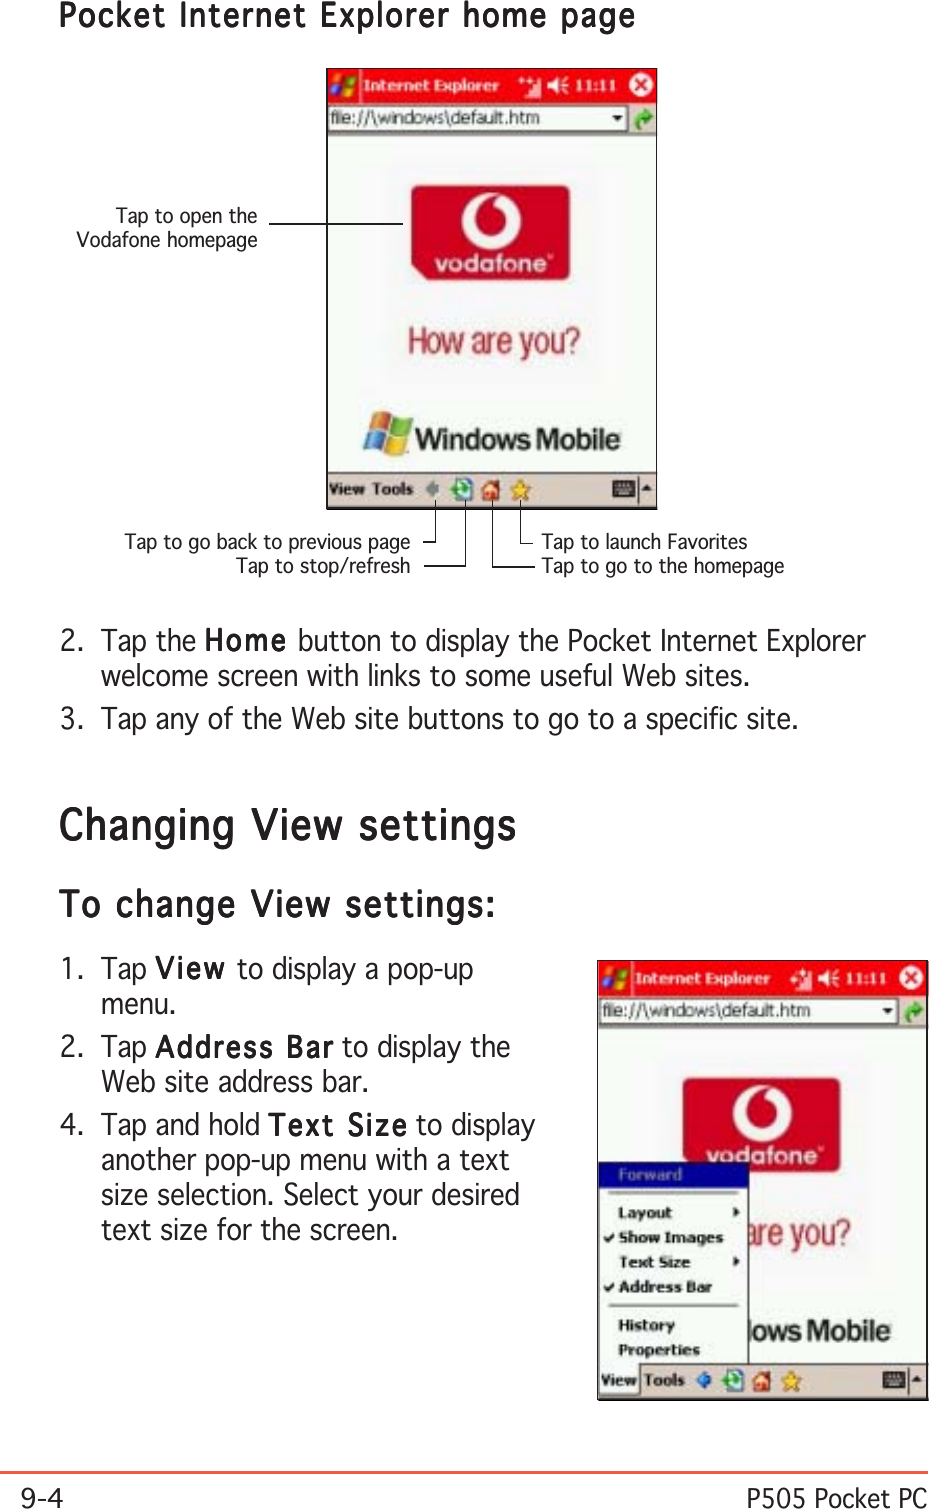 9-4P505 Pocket PC2. Tap the HomeHomeHomeHomeHo me button to display the Pocket Internet Explorerwelcome screen with links to some useful Web sites.3. Tap any of the Web site buttons to go to a specific site.Changing View settingsChanging View settingsChanging View settingsChanging View settingsChanging View settingsTo change View settings:To change View settings:To change View settings:To change View settings:To change View settings:1. Tap ViewViewViewViewVi ew to display a pop-upmenu.2. Tap Address BarAddress BarAddress BarAddress BarAddress Bar to display theWeb site address bar.4. Tap and hold Text SizeText SizeText SizeText SizeText Size to displayanother pop-up menu with a textsize selection. Select your desiredtext size for the screen.Tap to launch FavoritesTap to go to the homepageTap to go back to previous pageTap to stop/refreshTap to open theVodafone homepagePocket Internet Explorer home pagePocket Internet Explorer home pagePocket Internet Explorer home pagePocket Internet Explorer home pagePocket Internet Explorer home page